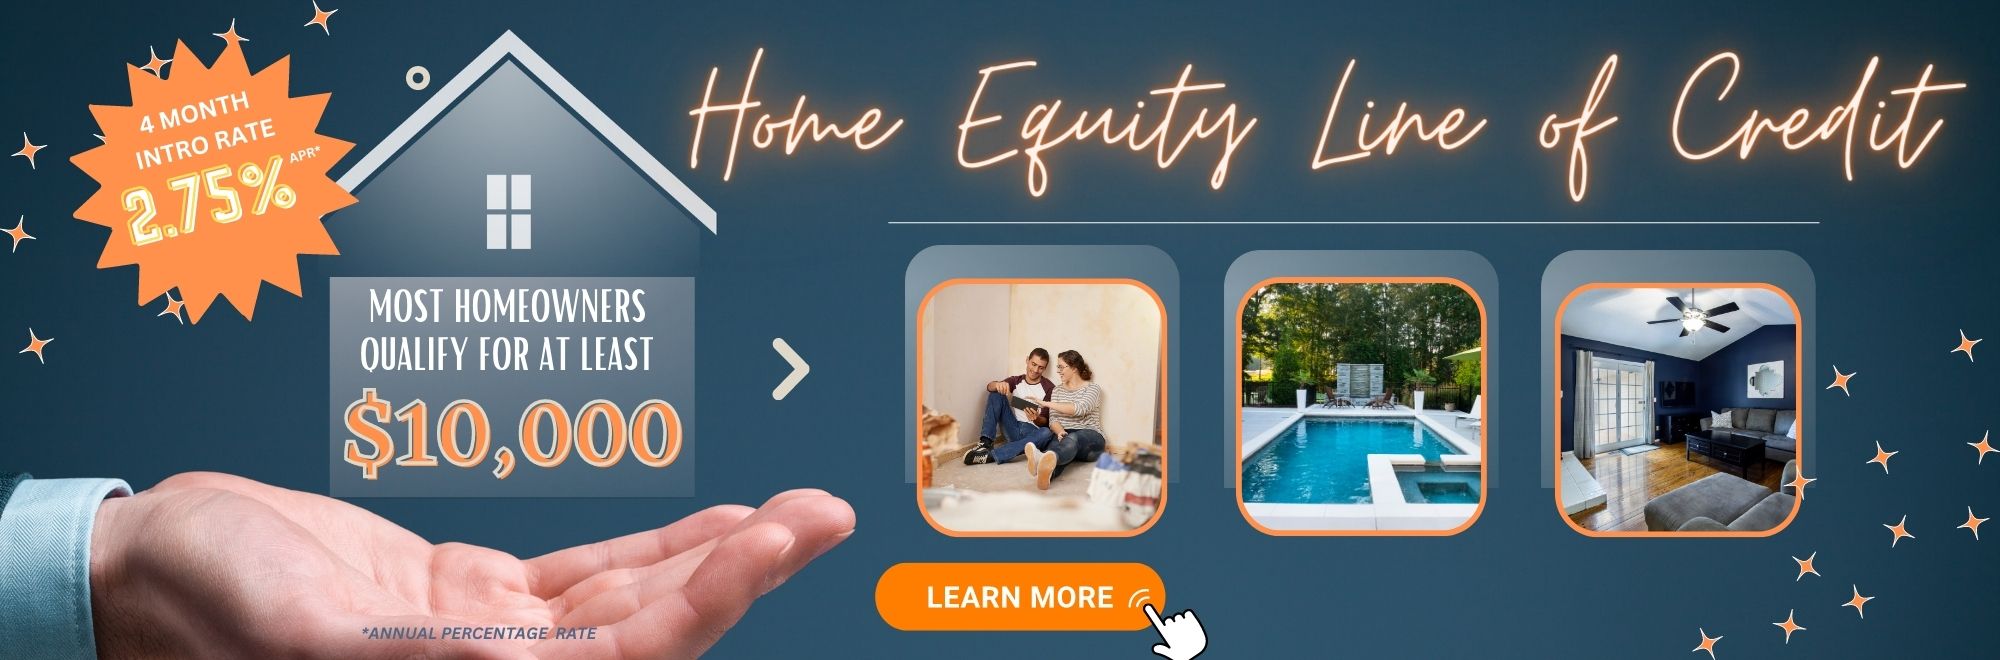 Learn more about our Home Equity Line of Credit. Most home owners qualify for at least $10,000. 4 month intro rate of 2.75% Annual Percentage Rate.